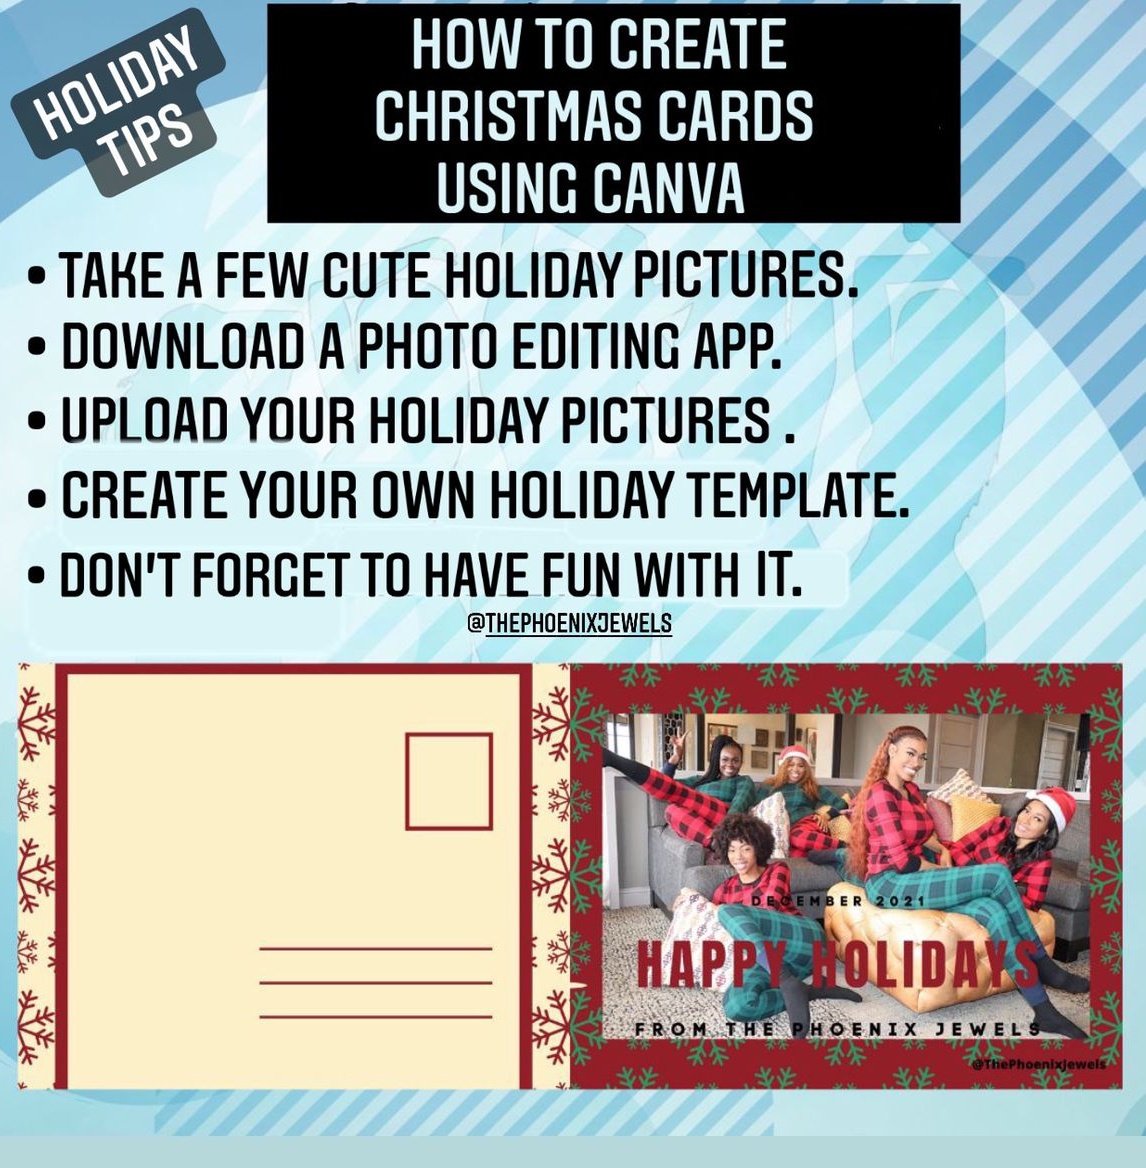 What's Holidays w/out Christmas cards? Not any Christmas cards create & personalize Ur own postcards. Great way 2 show ❤ spread holiday ☺️ 2 Ur loved ones. Fun & easy using Canva App tell us if these tips help. Comment⬇️#diyholidaycards #christmascards #canvaapp #shemustbeajewel